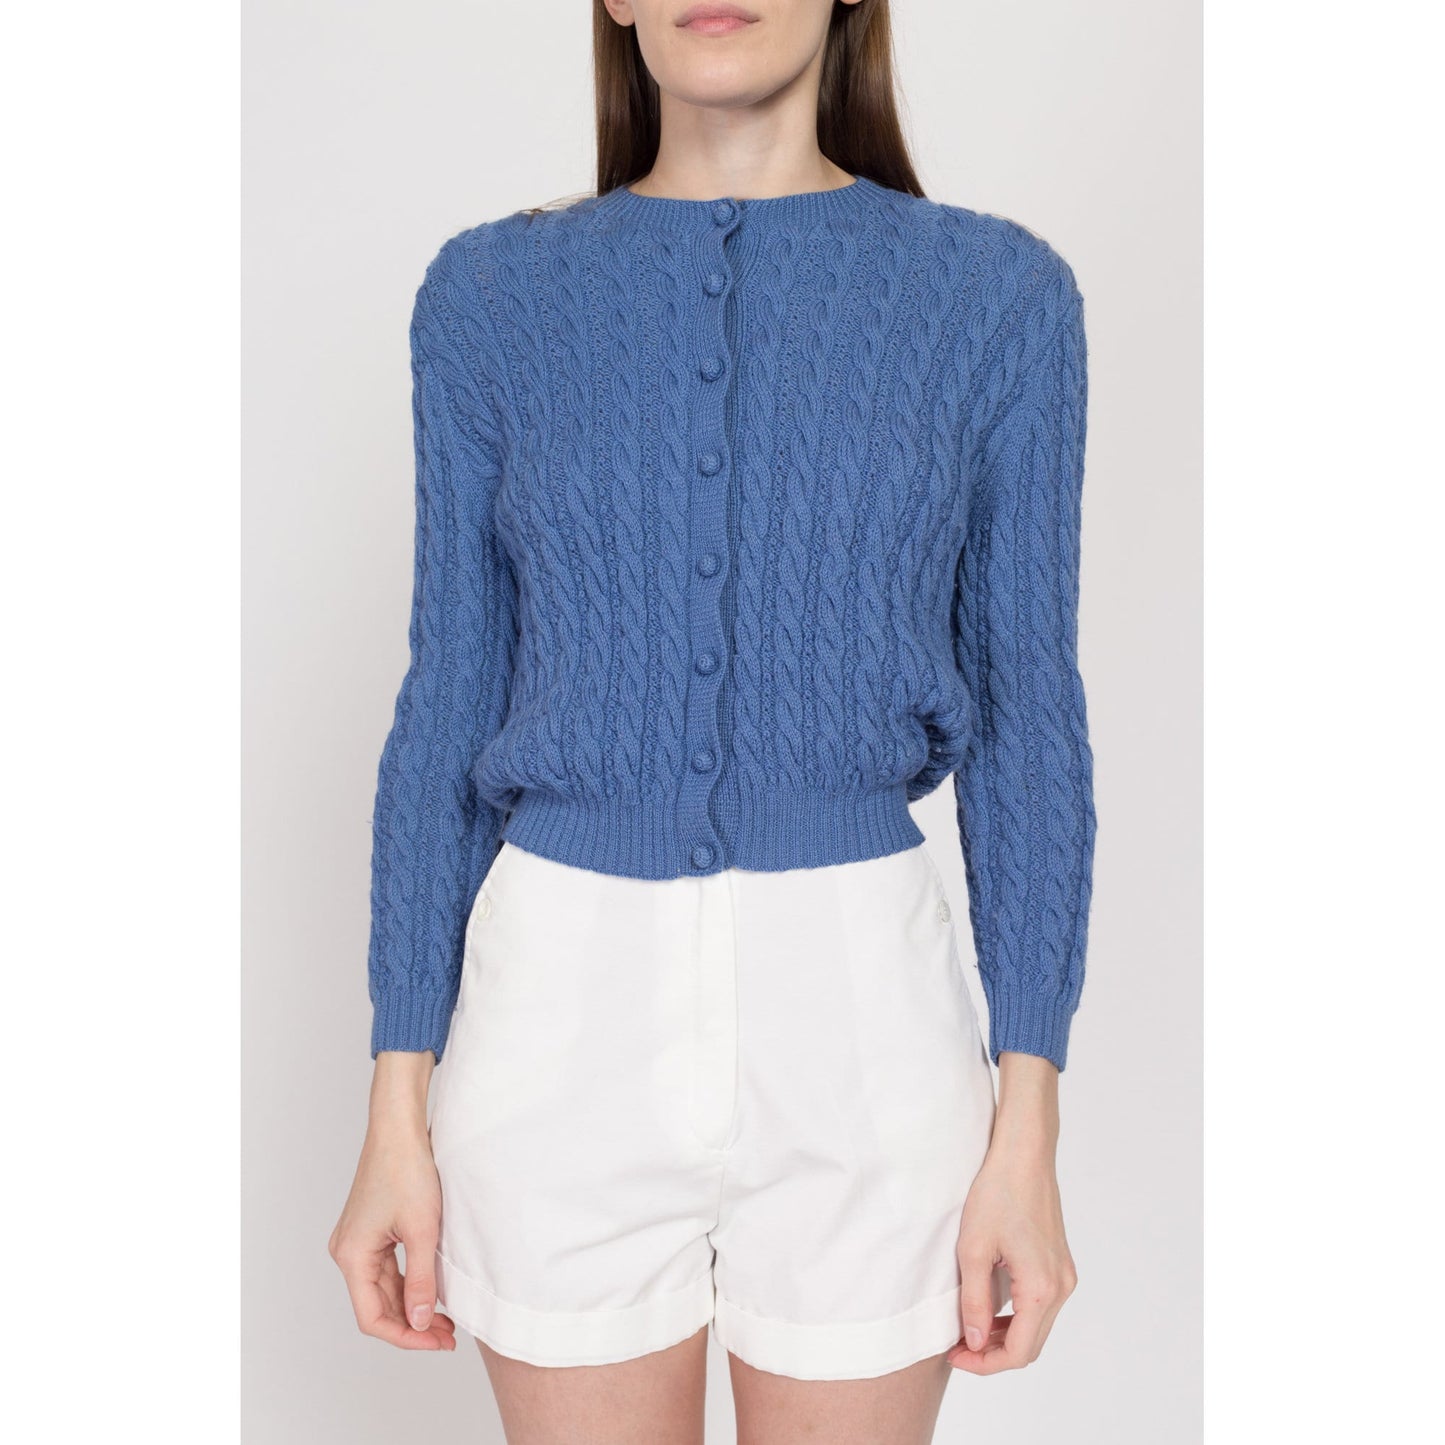 Medium 70s Cornflower Blue Cropped Cable Knit Cardigan | Vintage Button Up Lightweight Wool Sweater